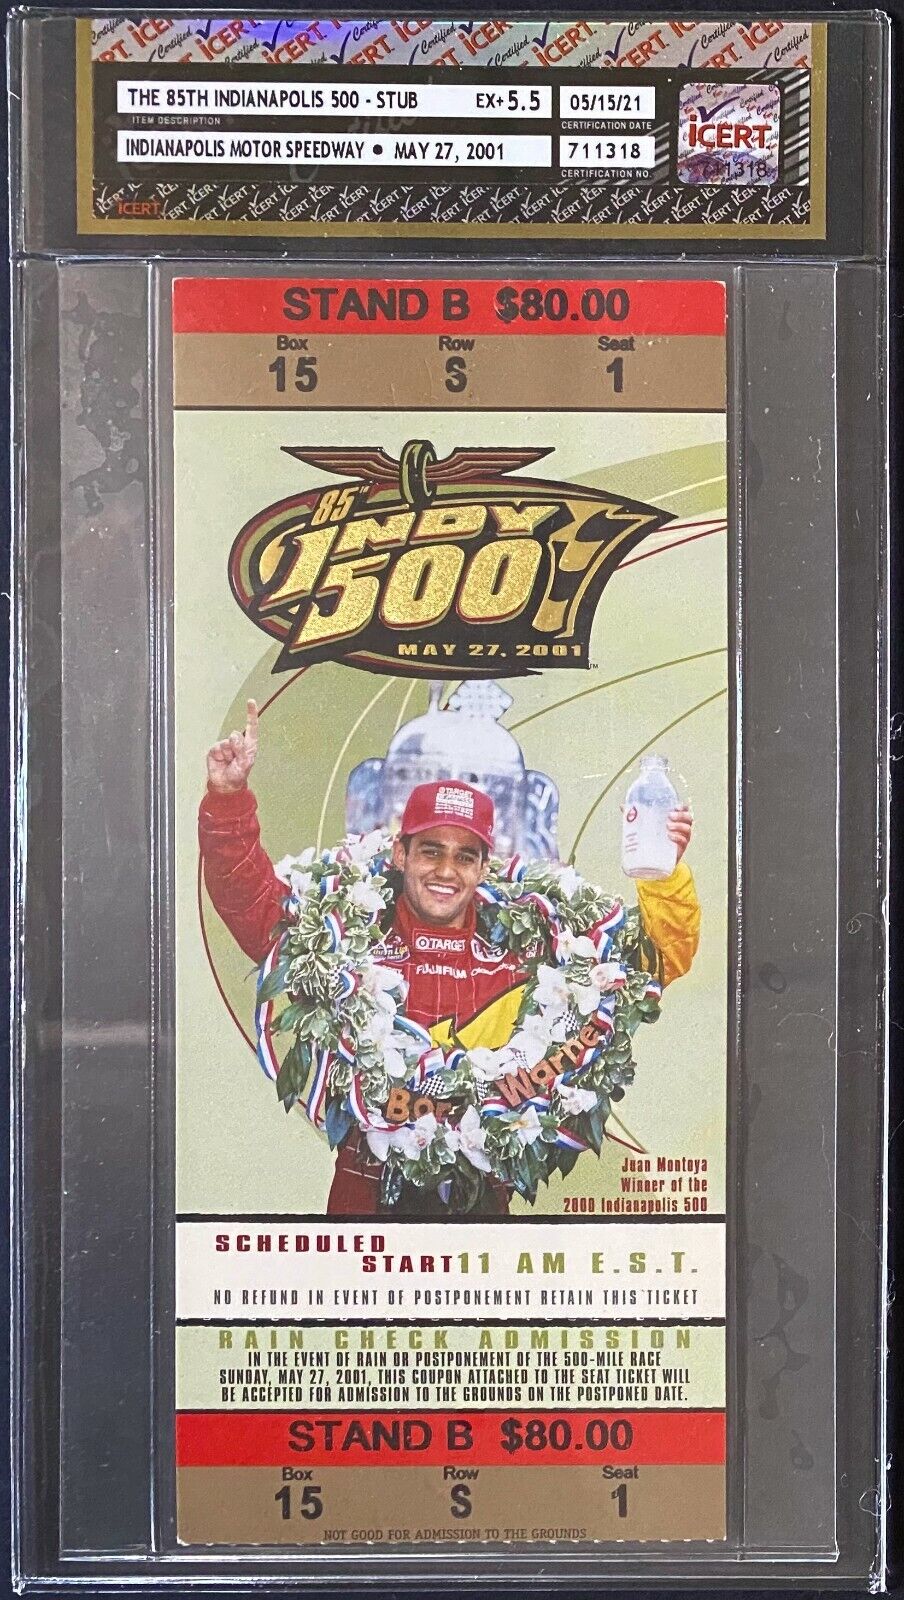 2001 Vintage Indy 500 Race Ticket Helio Castroneves Indianapolis Motor Speedway